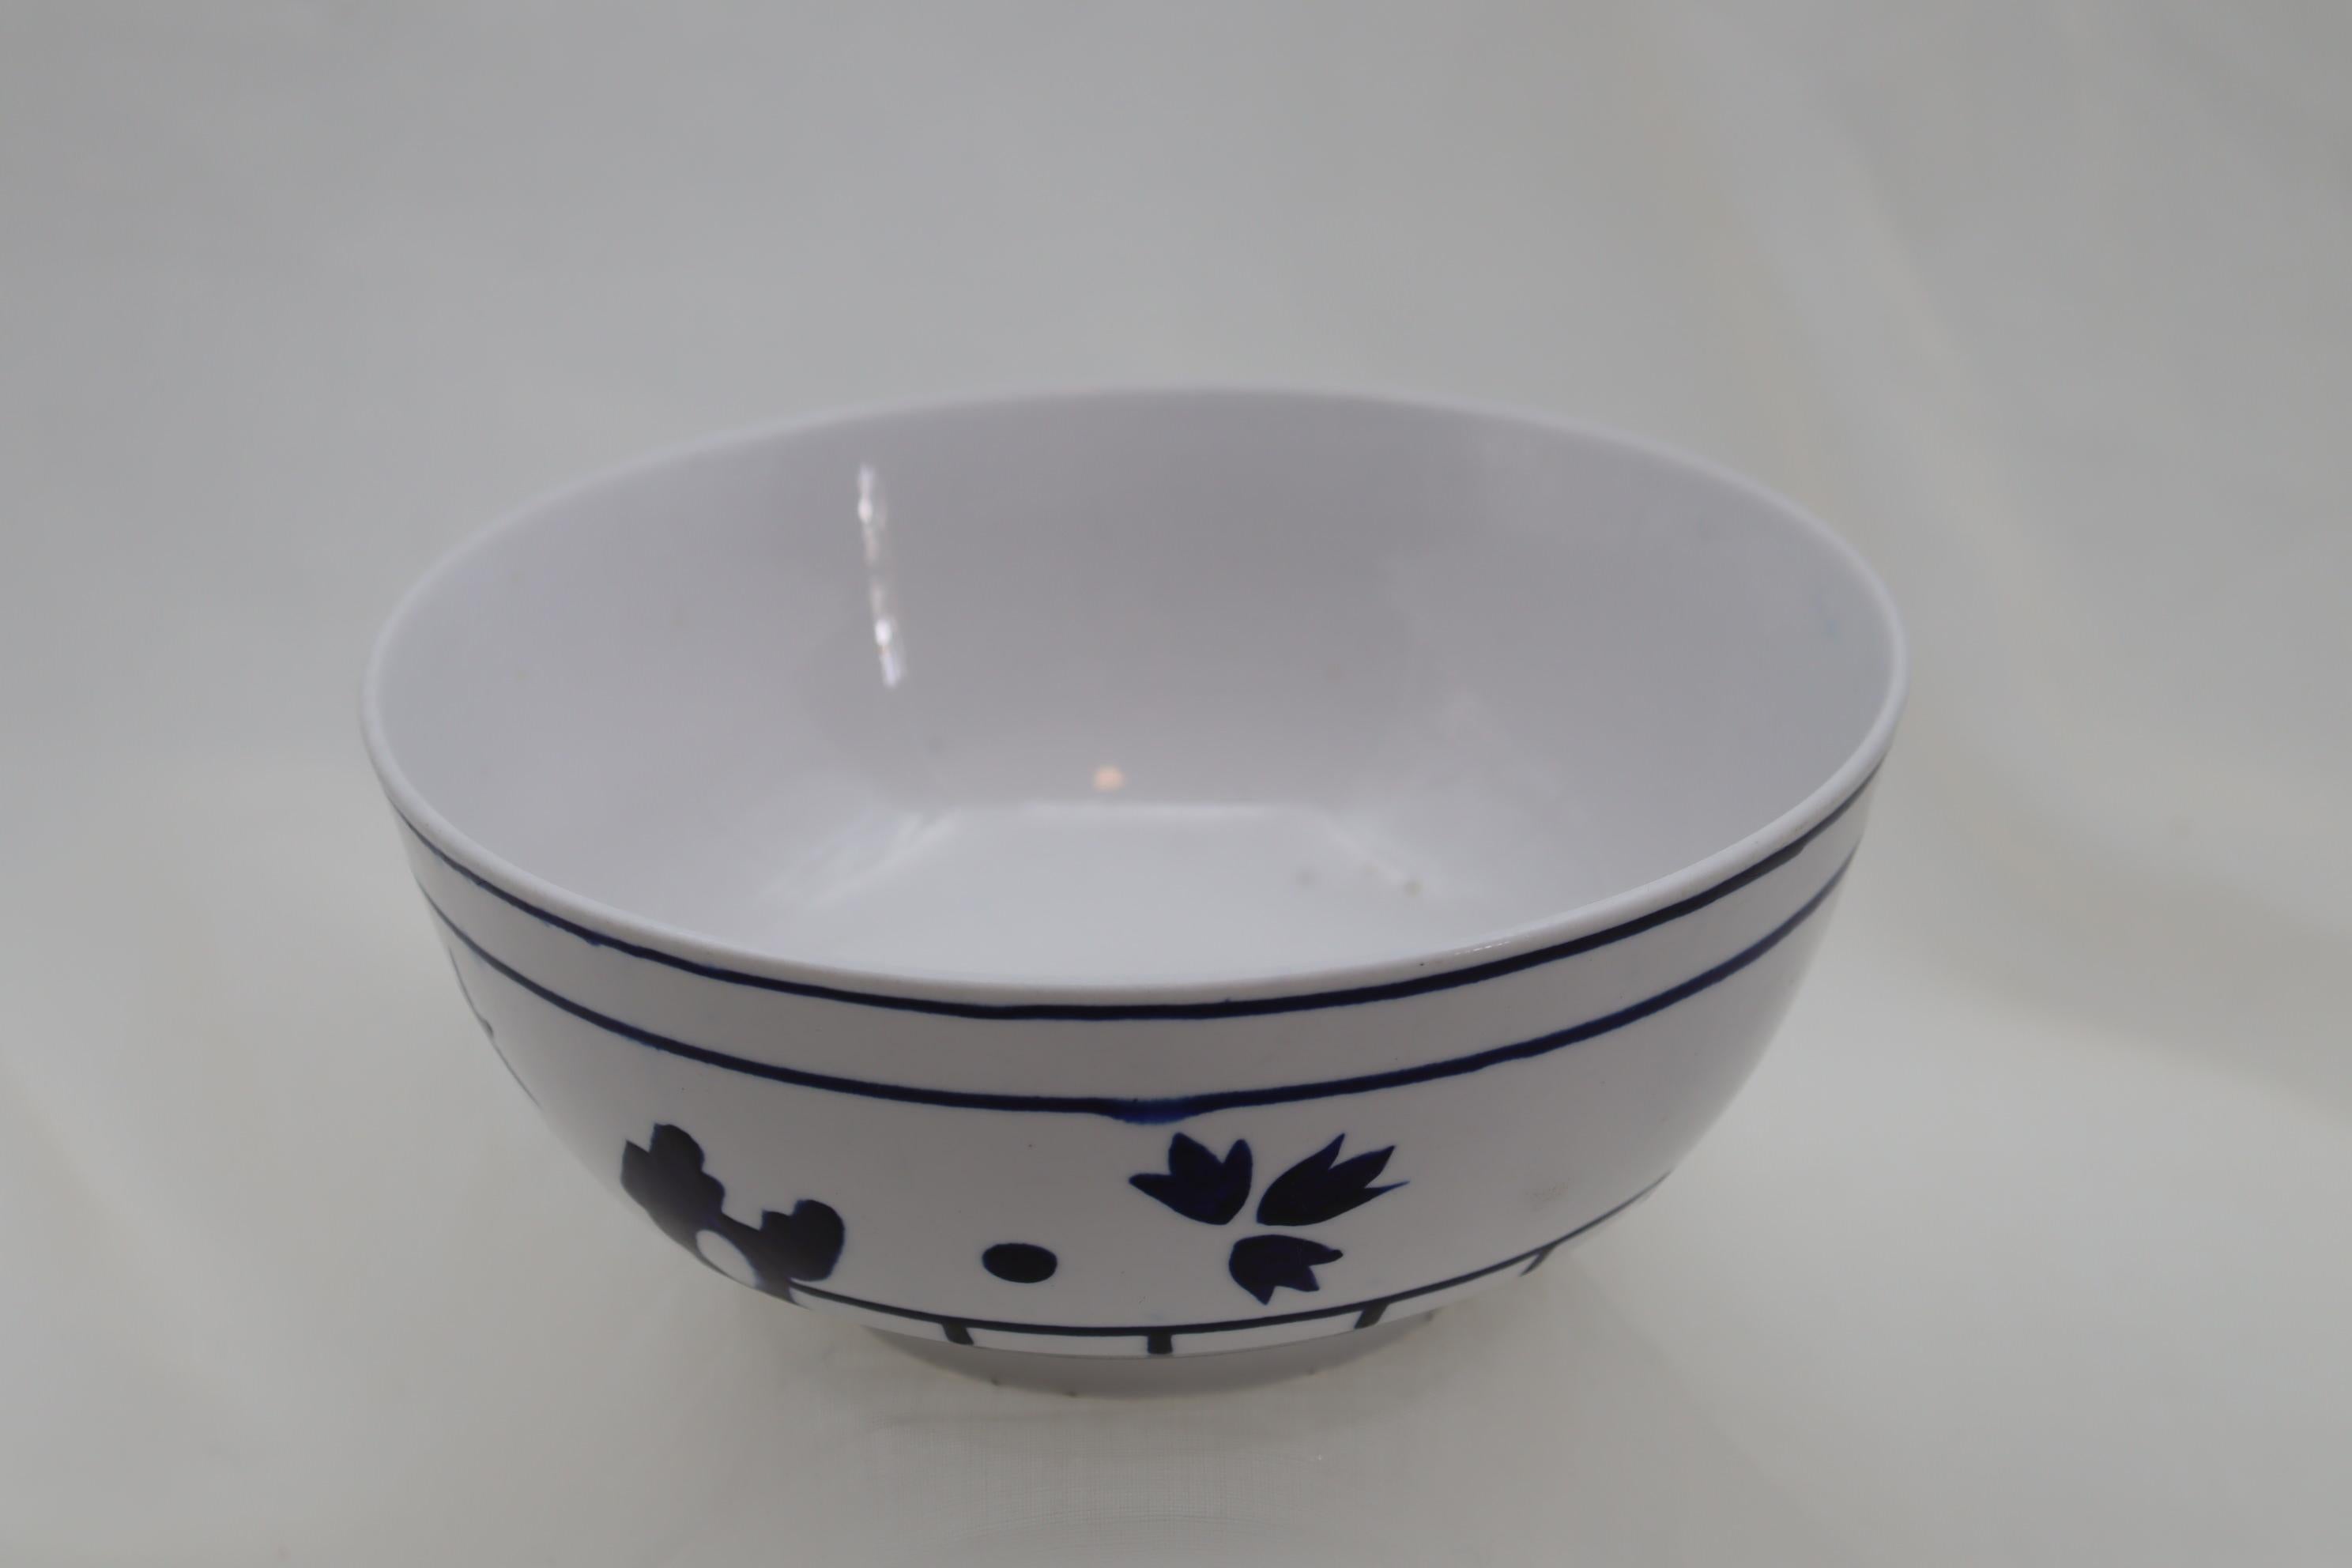 This is an interesting survivor. A Barr, Flight and Barr porcelain bowl that is painted in underglaze blue as the base for the 